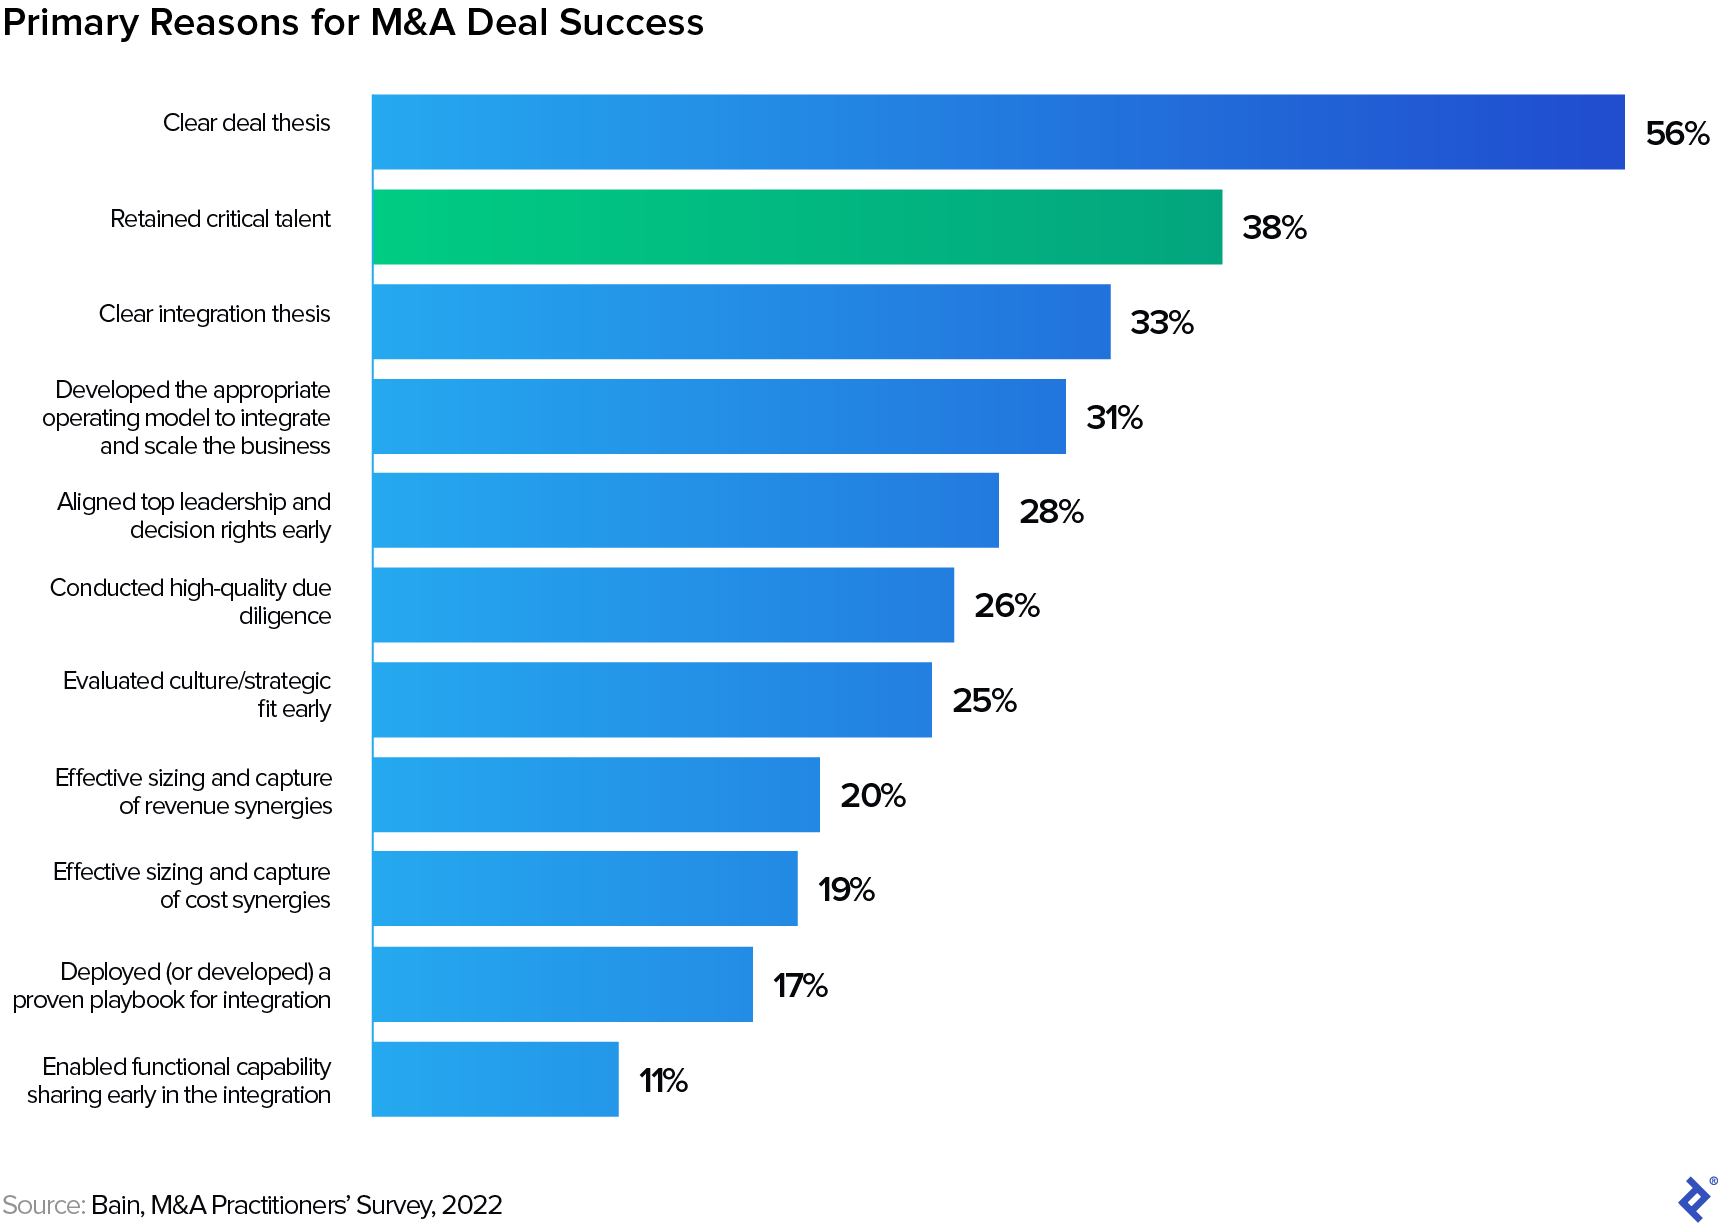 Bar chart titled, "Primary Reasons for M&A Deal Success." Values include: Clear deals thesis, 56%; Retained critical talent, 38%; Clear integration thesis, 33%; Developed the appropriate operating model to integrate and scale the business, 31%; Aligned top leadership and decision rights early, 28%; Conducted high-quality due diligence, 26%; Evaluated culture/strategic fit early, 25%; Effective sizing and capture of revenue synergies, 20%; Deployed (or developed) a proven playbook for integration, 17%; Enabled functional capability sharing early in the integration, 11%.